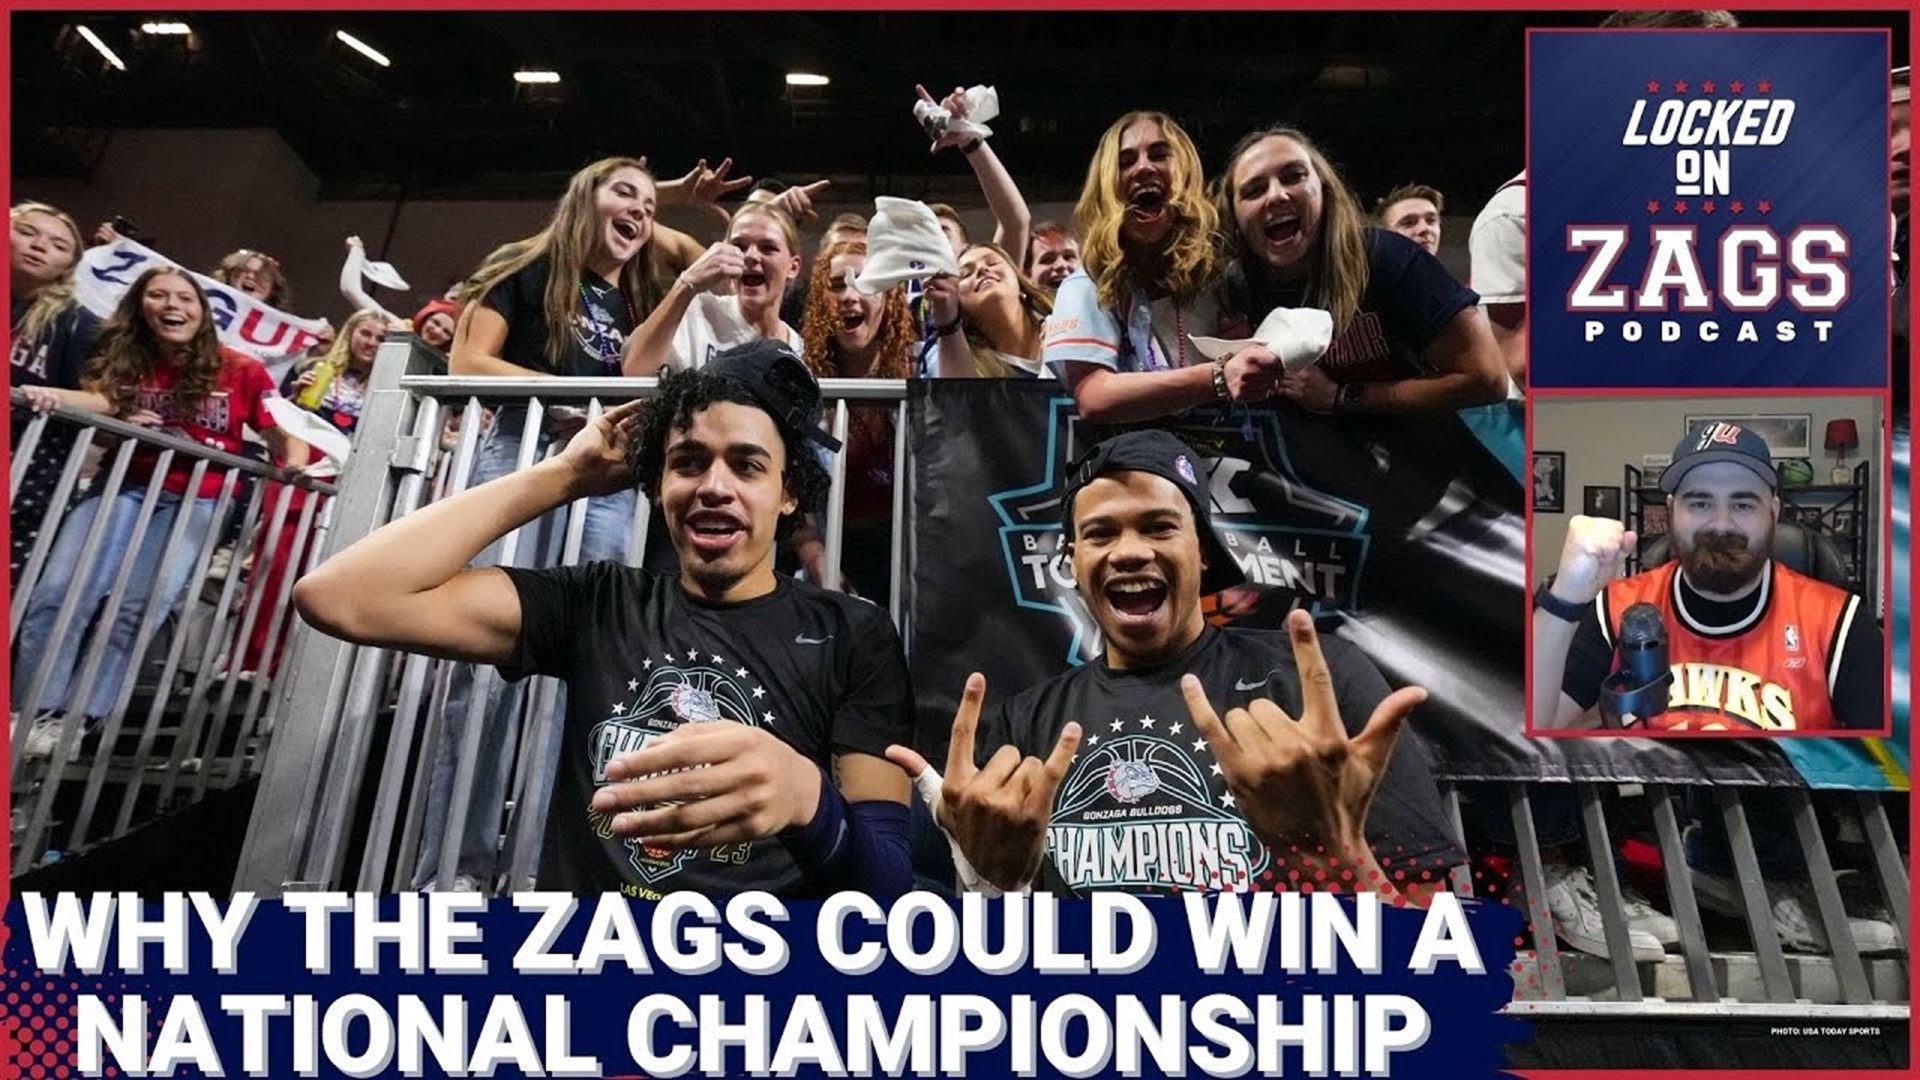 The Gonzaga Bulldogs dominated the Saint Mary's Gaels in Las Vegas on Tuesday to win the WCC Tournament Championship on the back of a record-breaking performance!